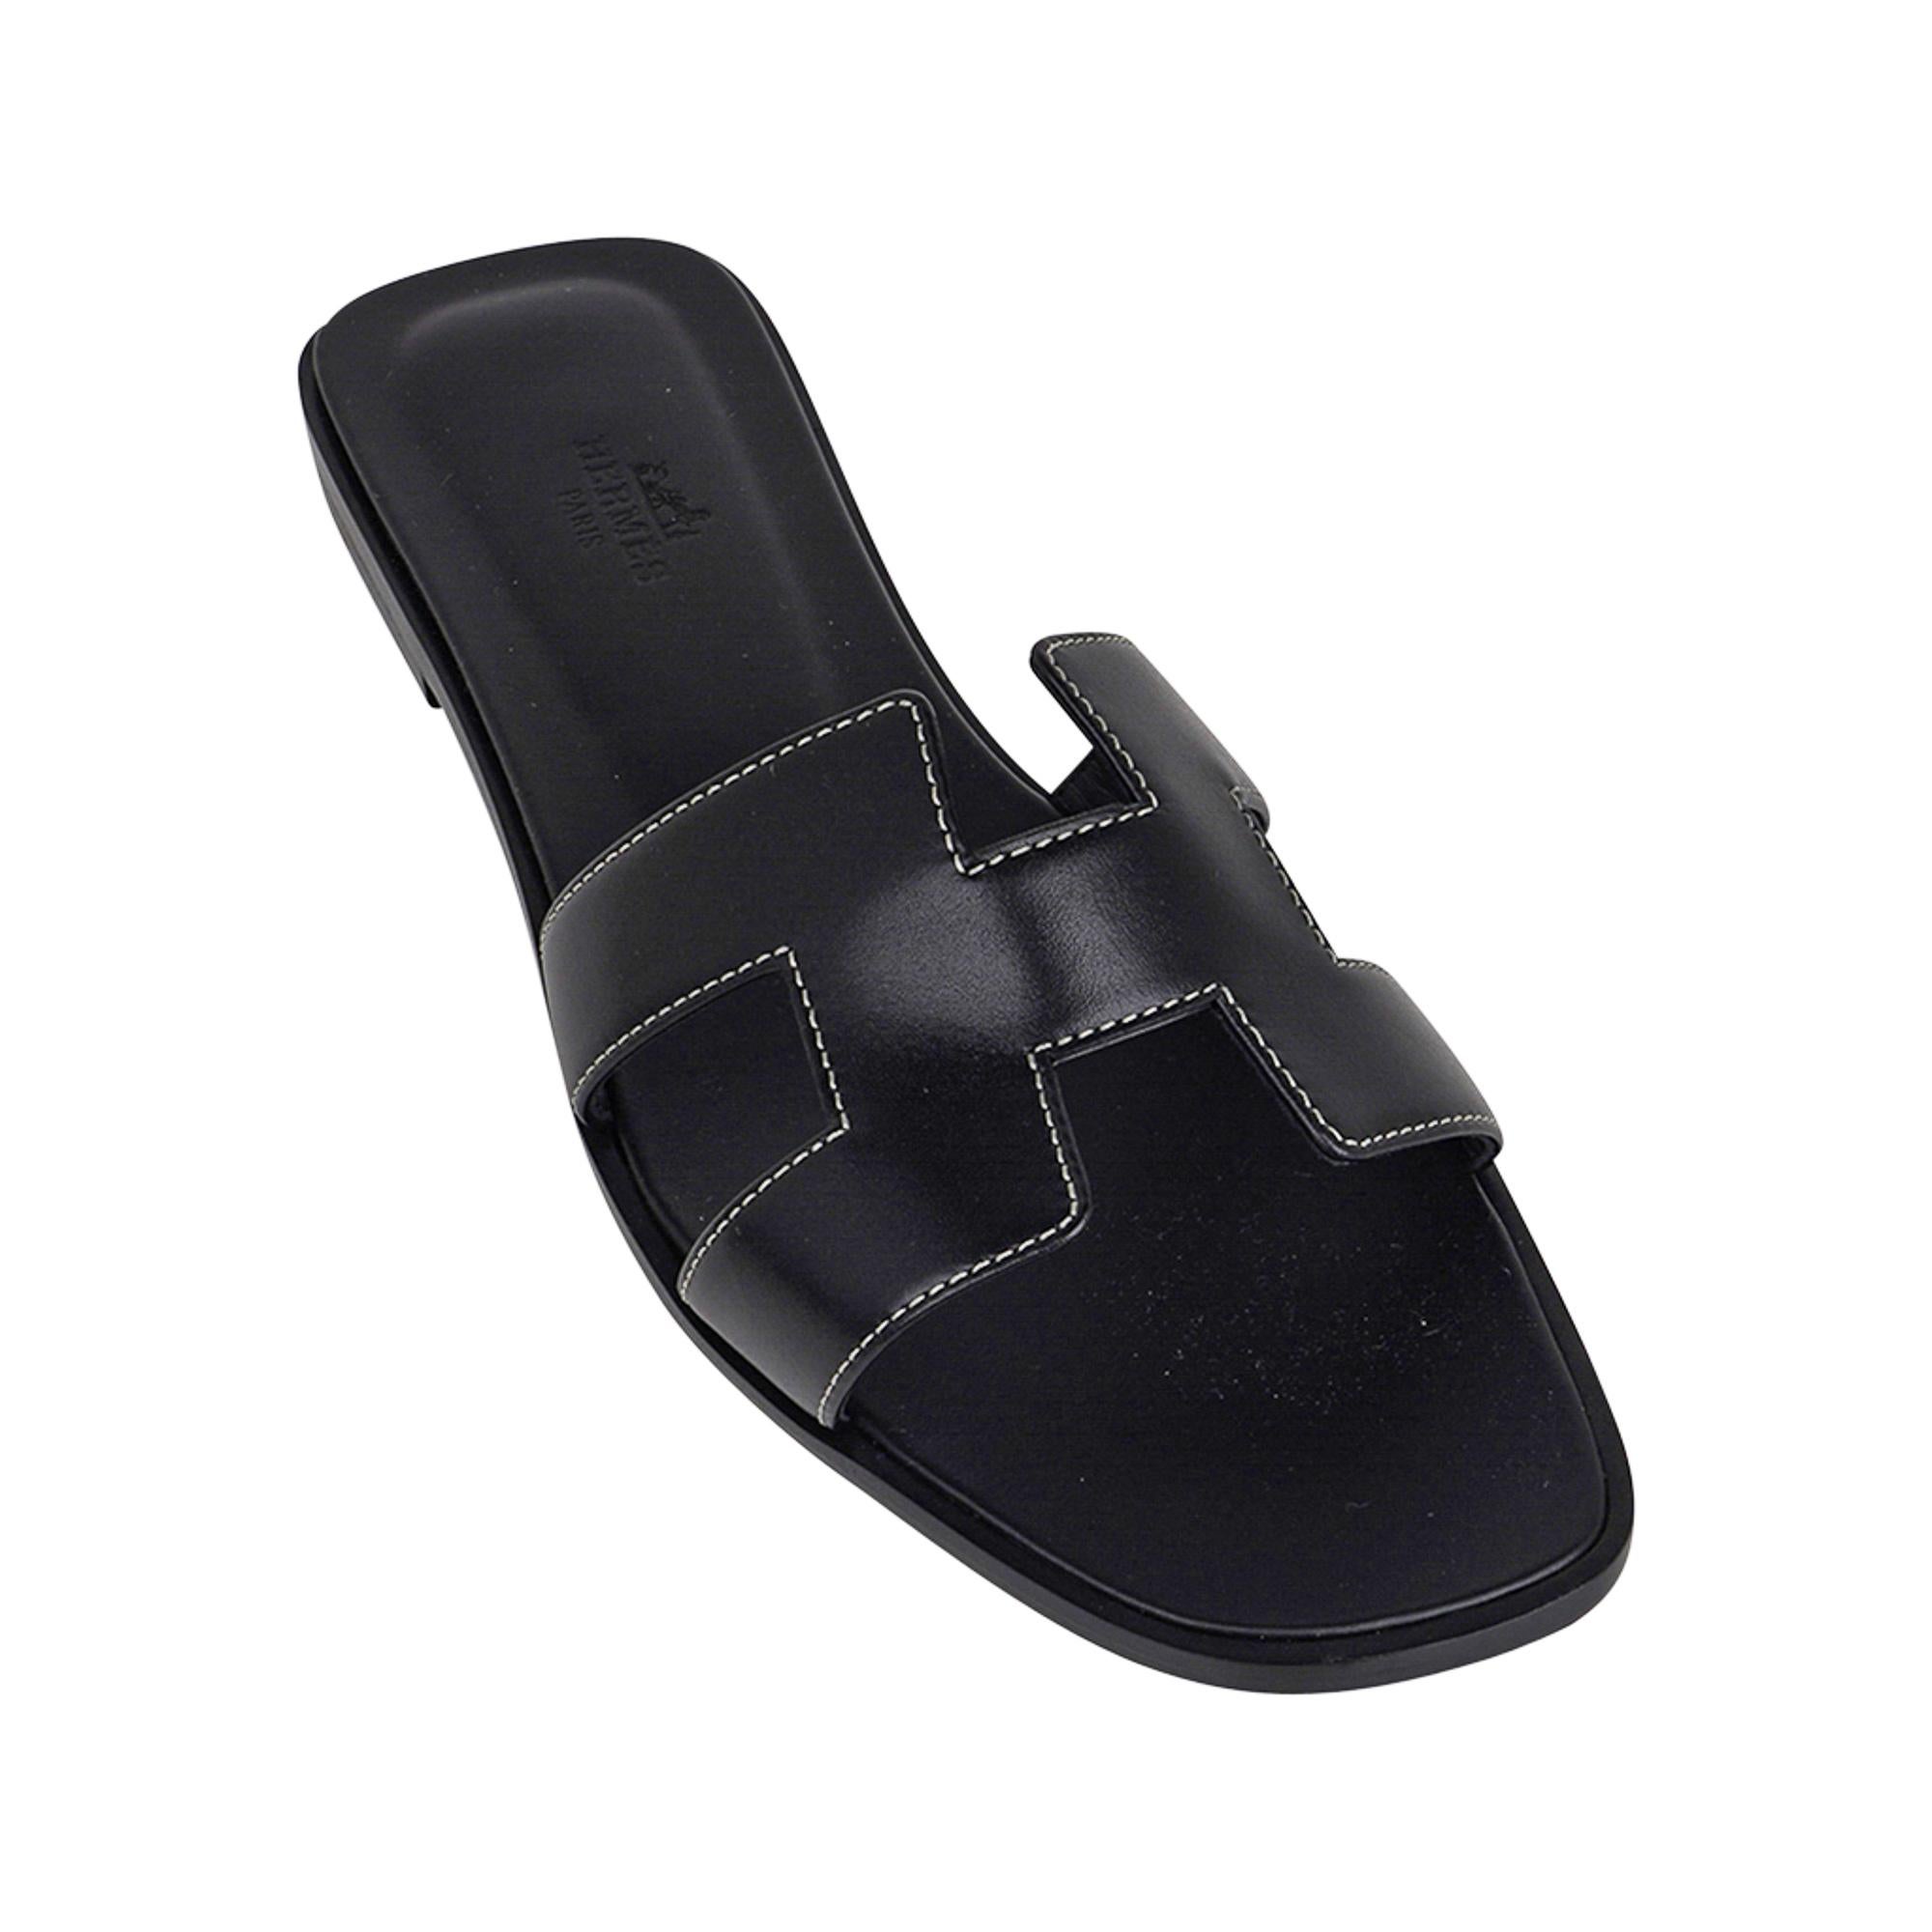 Mightychic offers a pair of Hermes Oran exquisite Black calfskin slides.
The iconic bone top stitched H cutout over the top of the foot in sublime calfskin.
Black embossed calfskin insole. 
Wood heel with leather sole. 
Comes with sleepers,